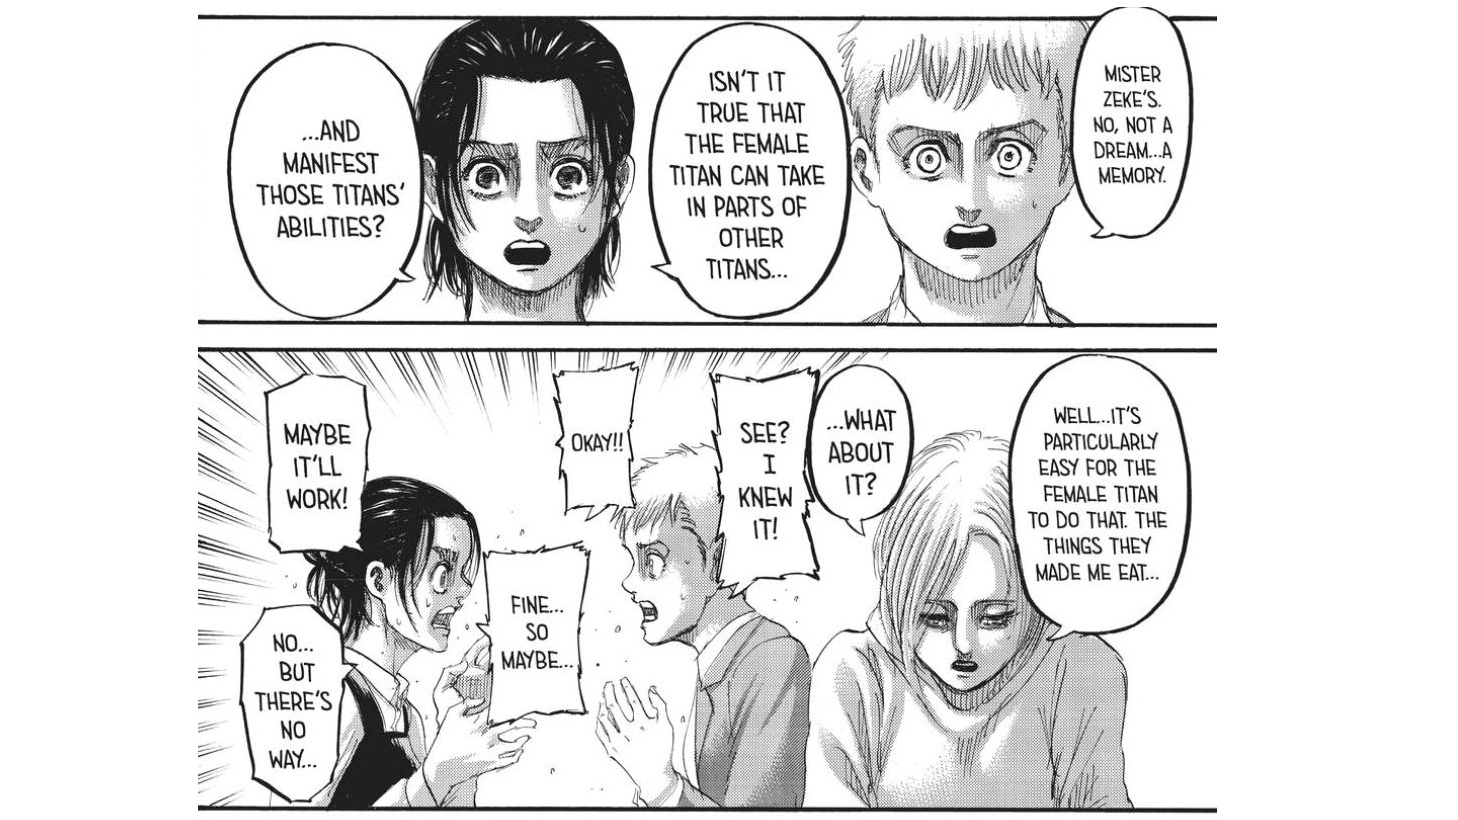 Attack On Titan Ending Annie Falco Talking Getting Powers From Other Titans By Consuming Them Manga